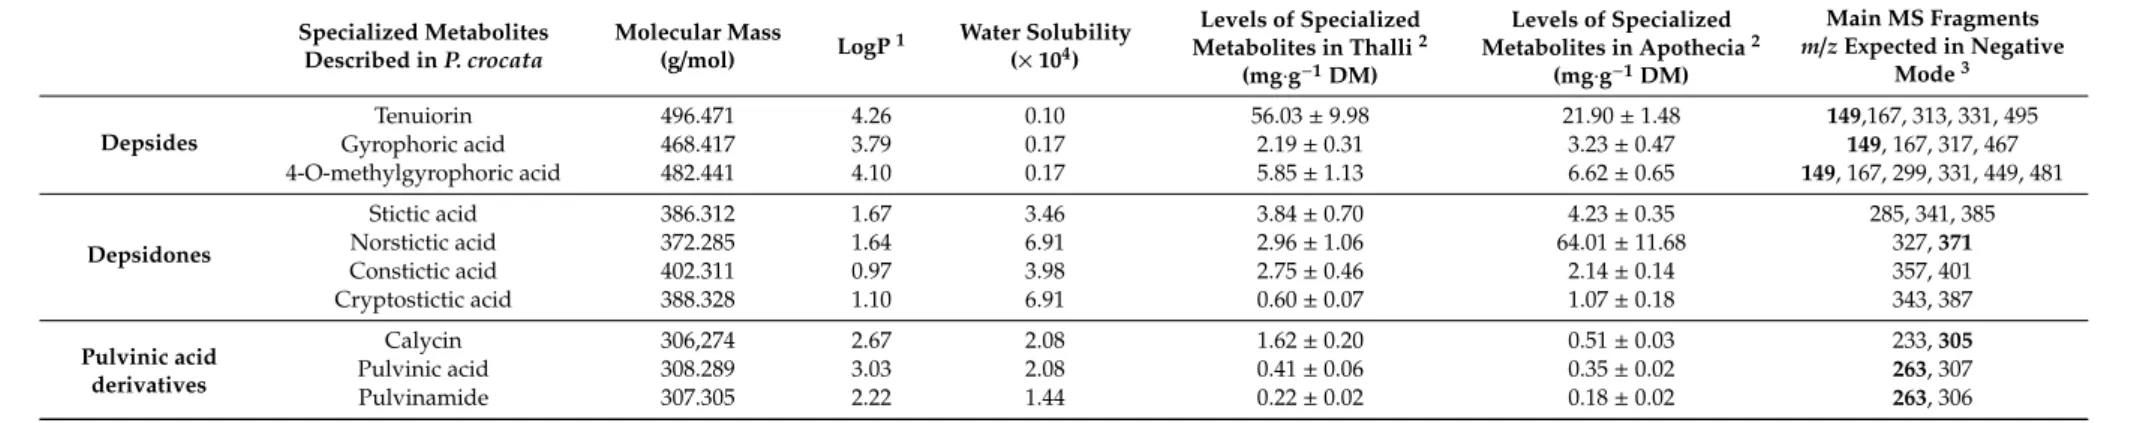 Table 1. Main phenolic specialized metabolites families: quantification in the acetone extracts of thalli, soralia, and apothecia, including physicochemical properties and fragmentation in negative mode.